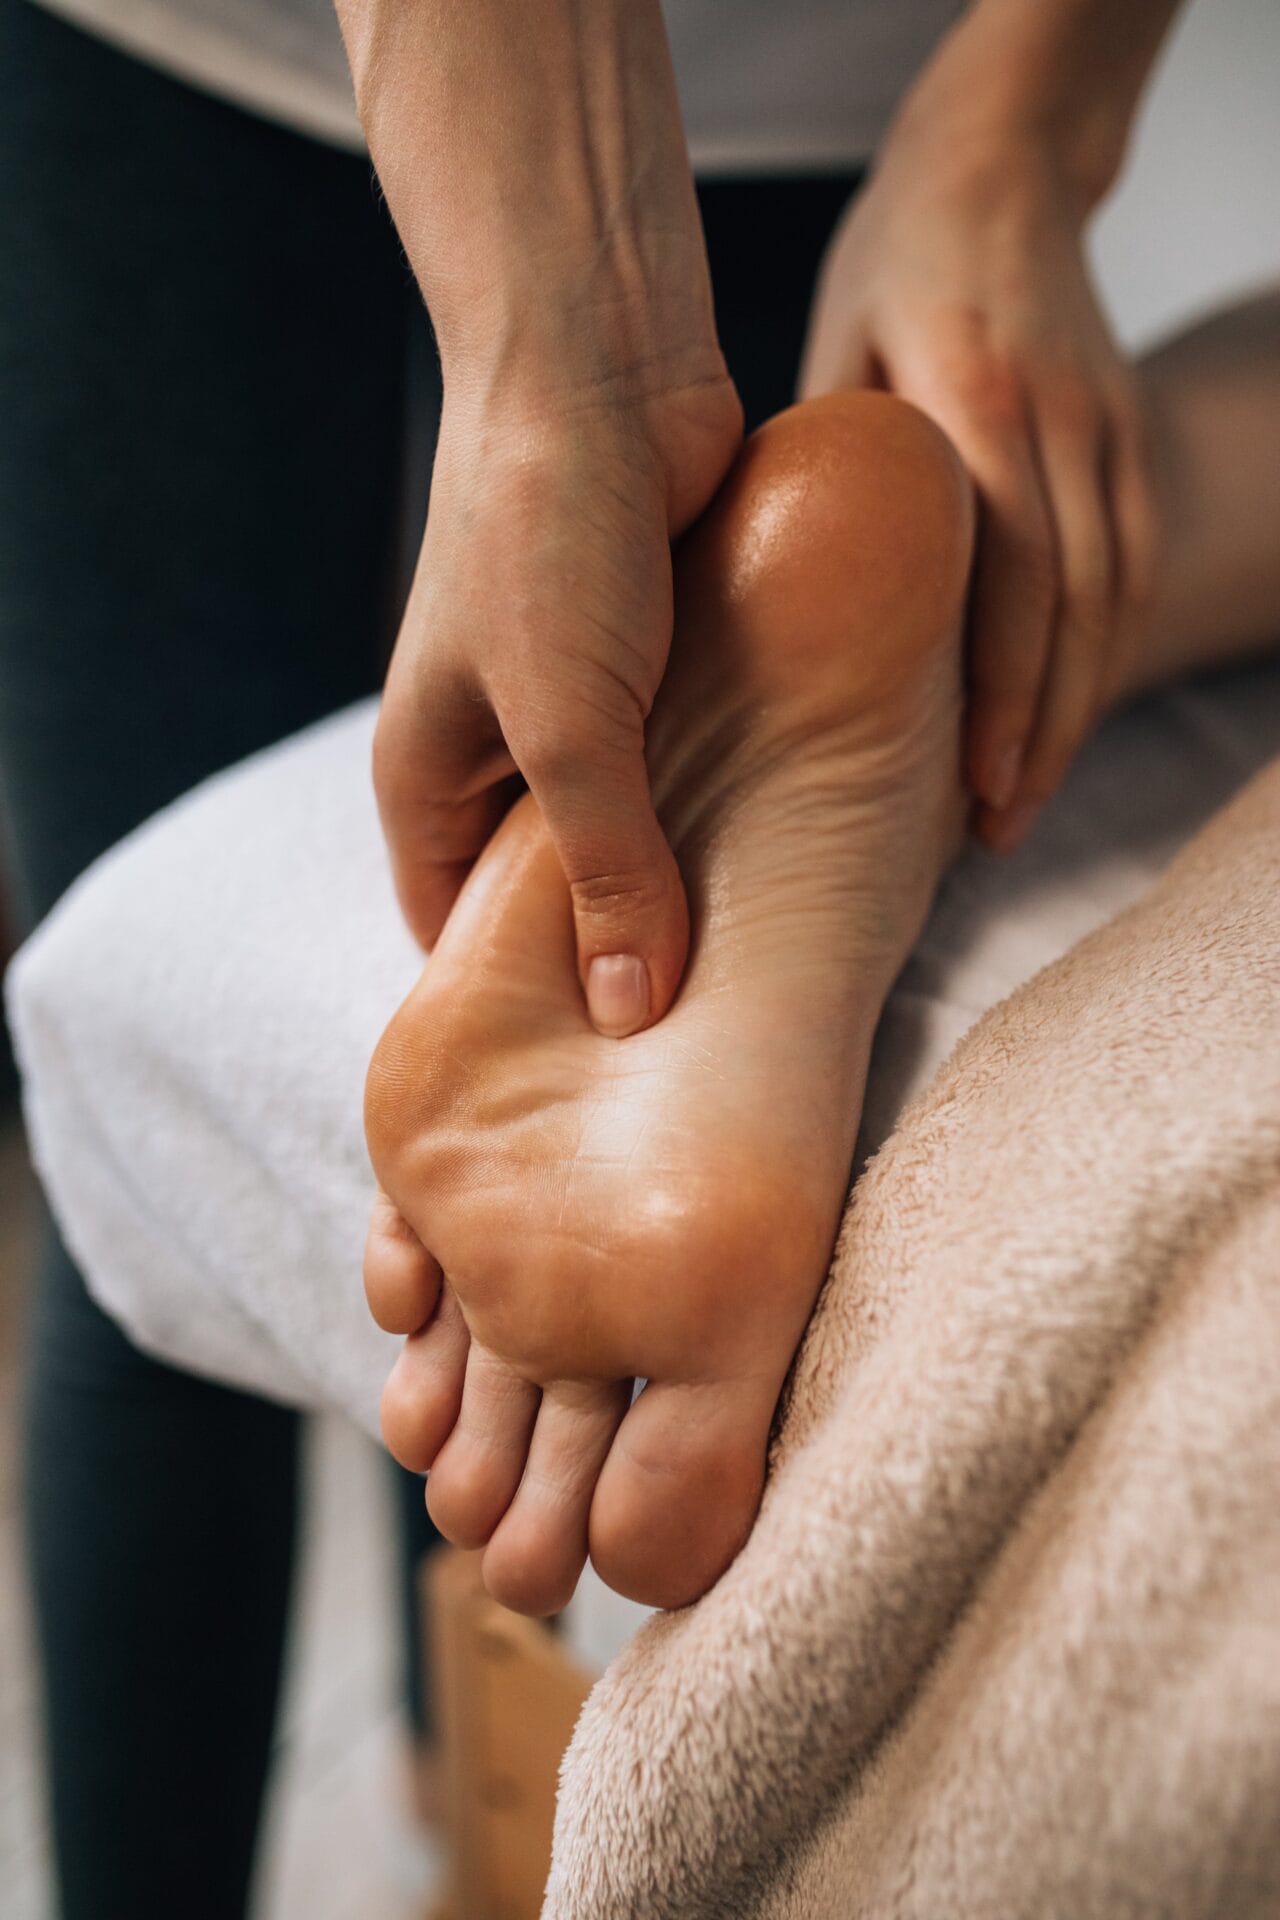 Importance of treating your feet right with a foot massage at a spa.